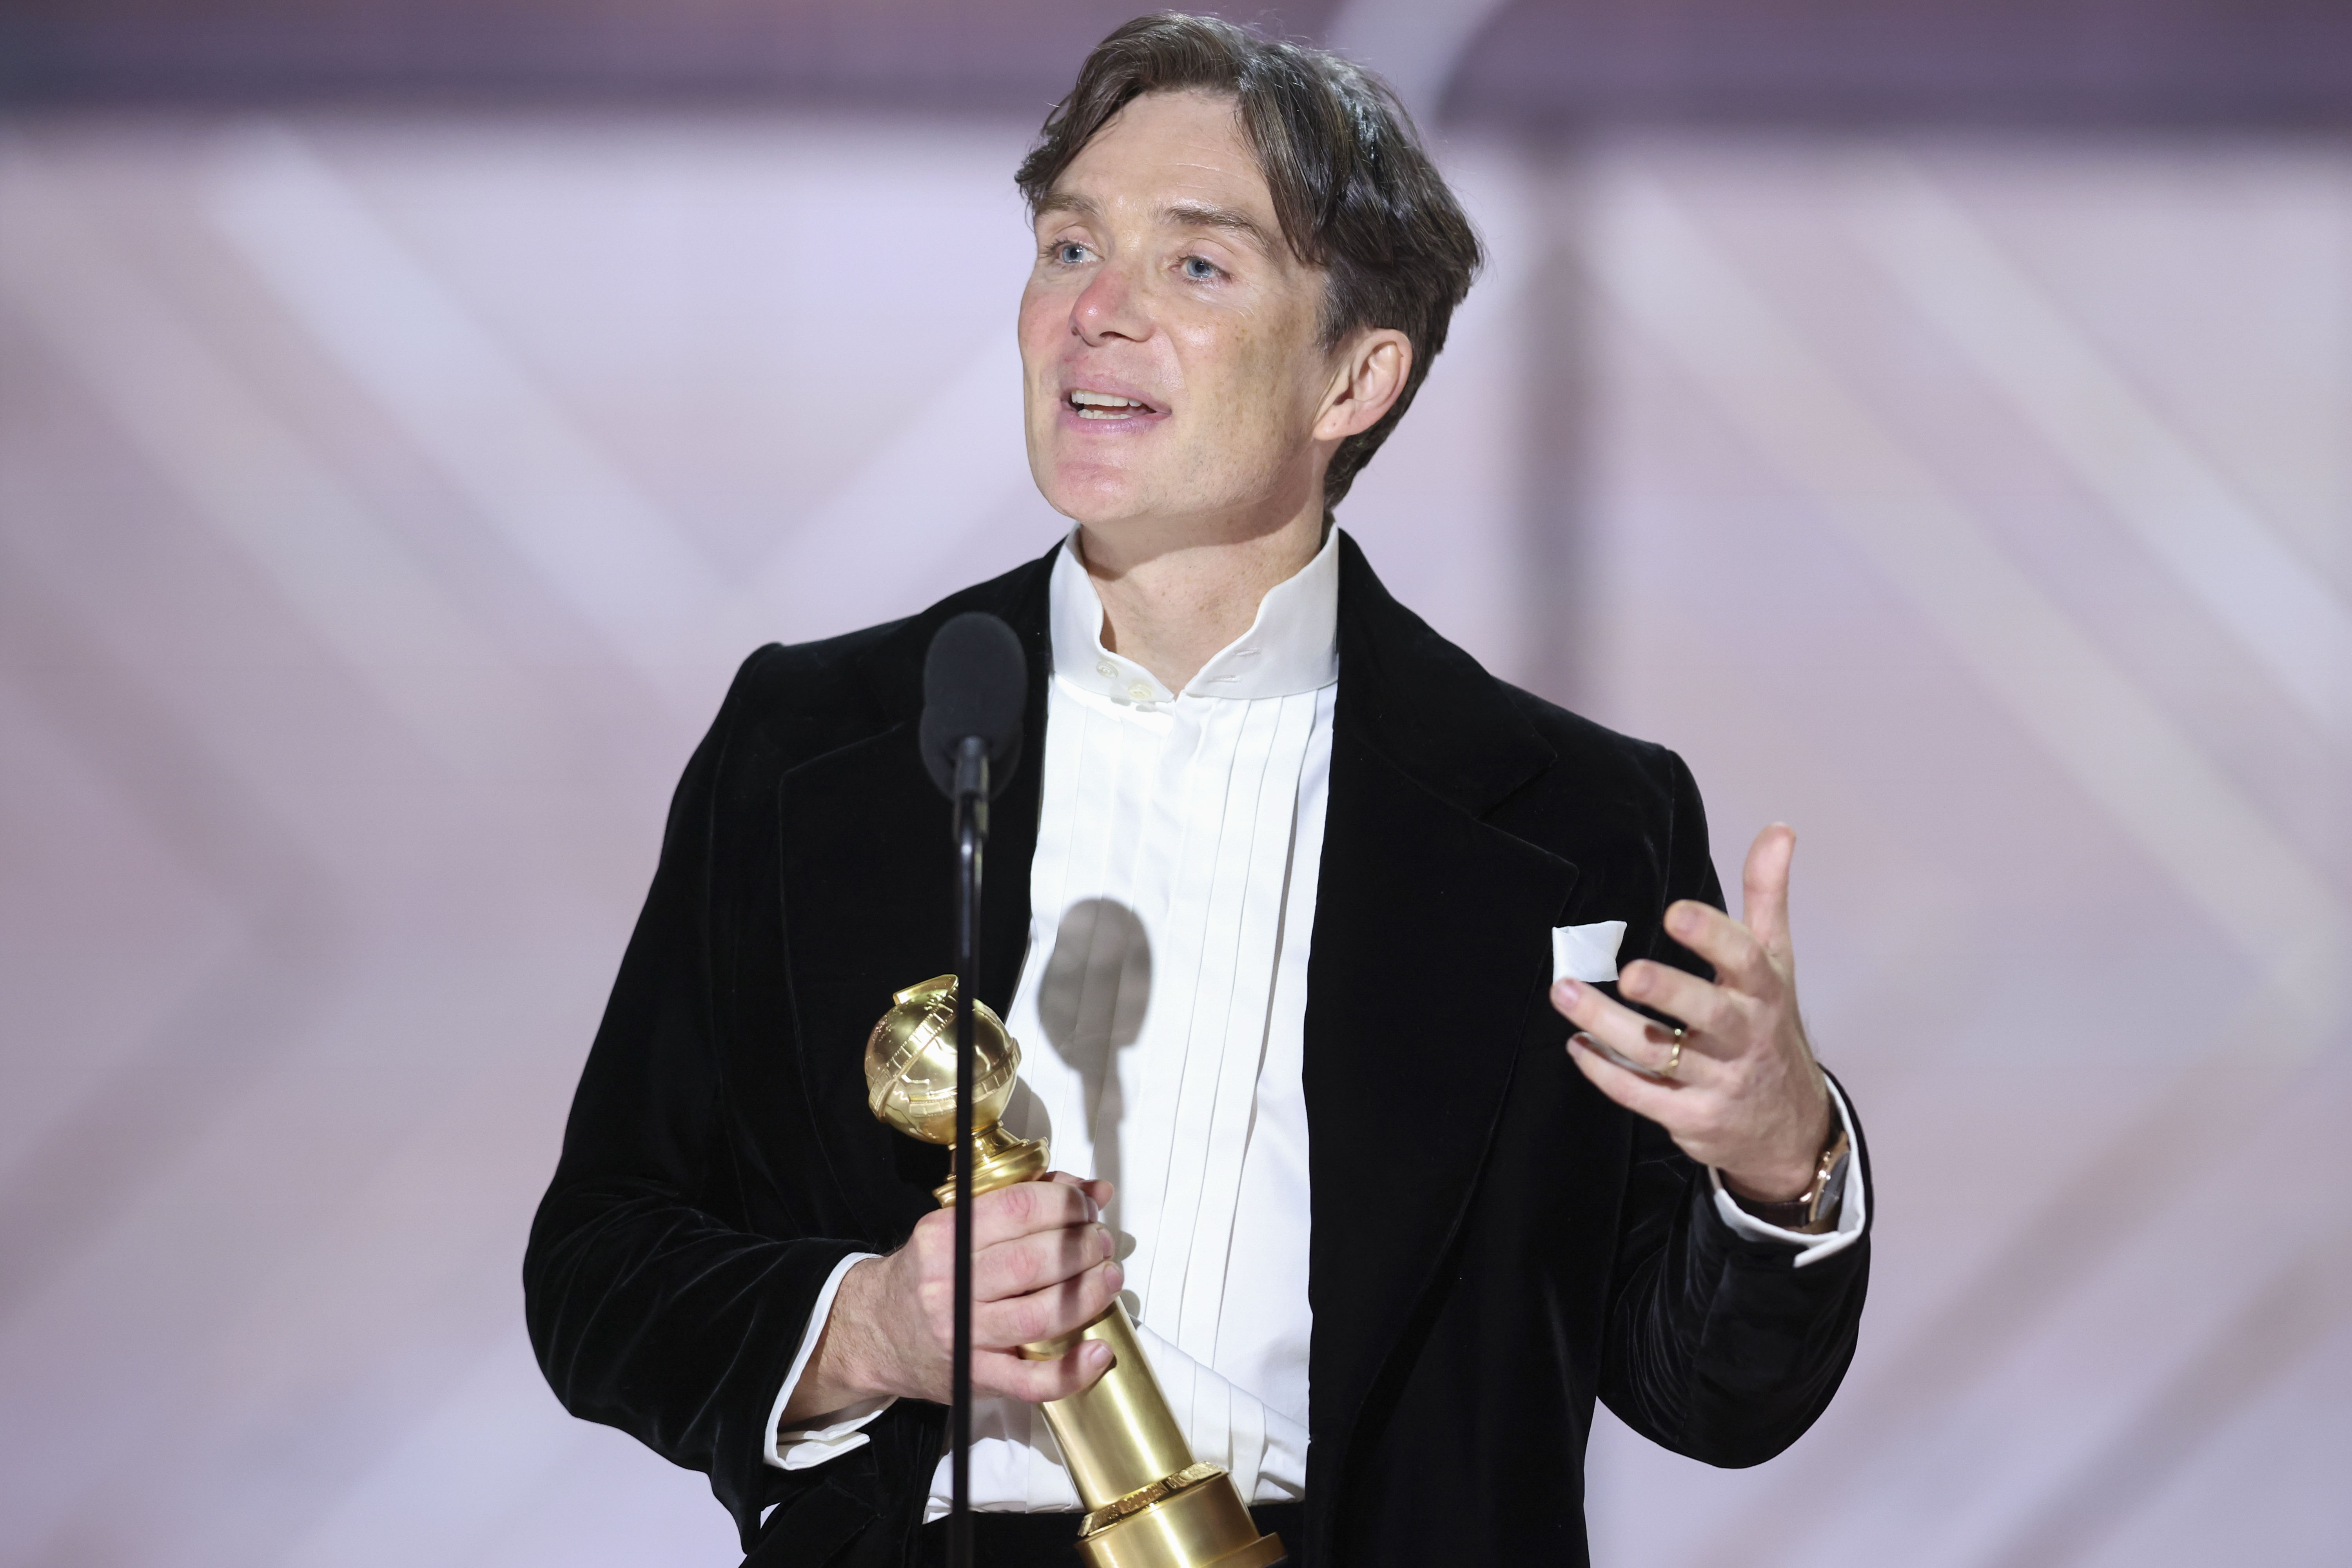 Cillian Murphy accepts the award for Best Performance by a Male Actor in a Motion Picture Drama for "Oppenheimer" at the 81st Golden Globe Awards on January 7, 2024 in Beverly Hills, California | Source: Getty Images